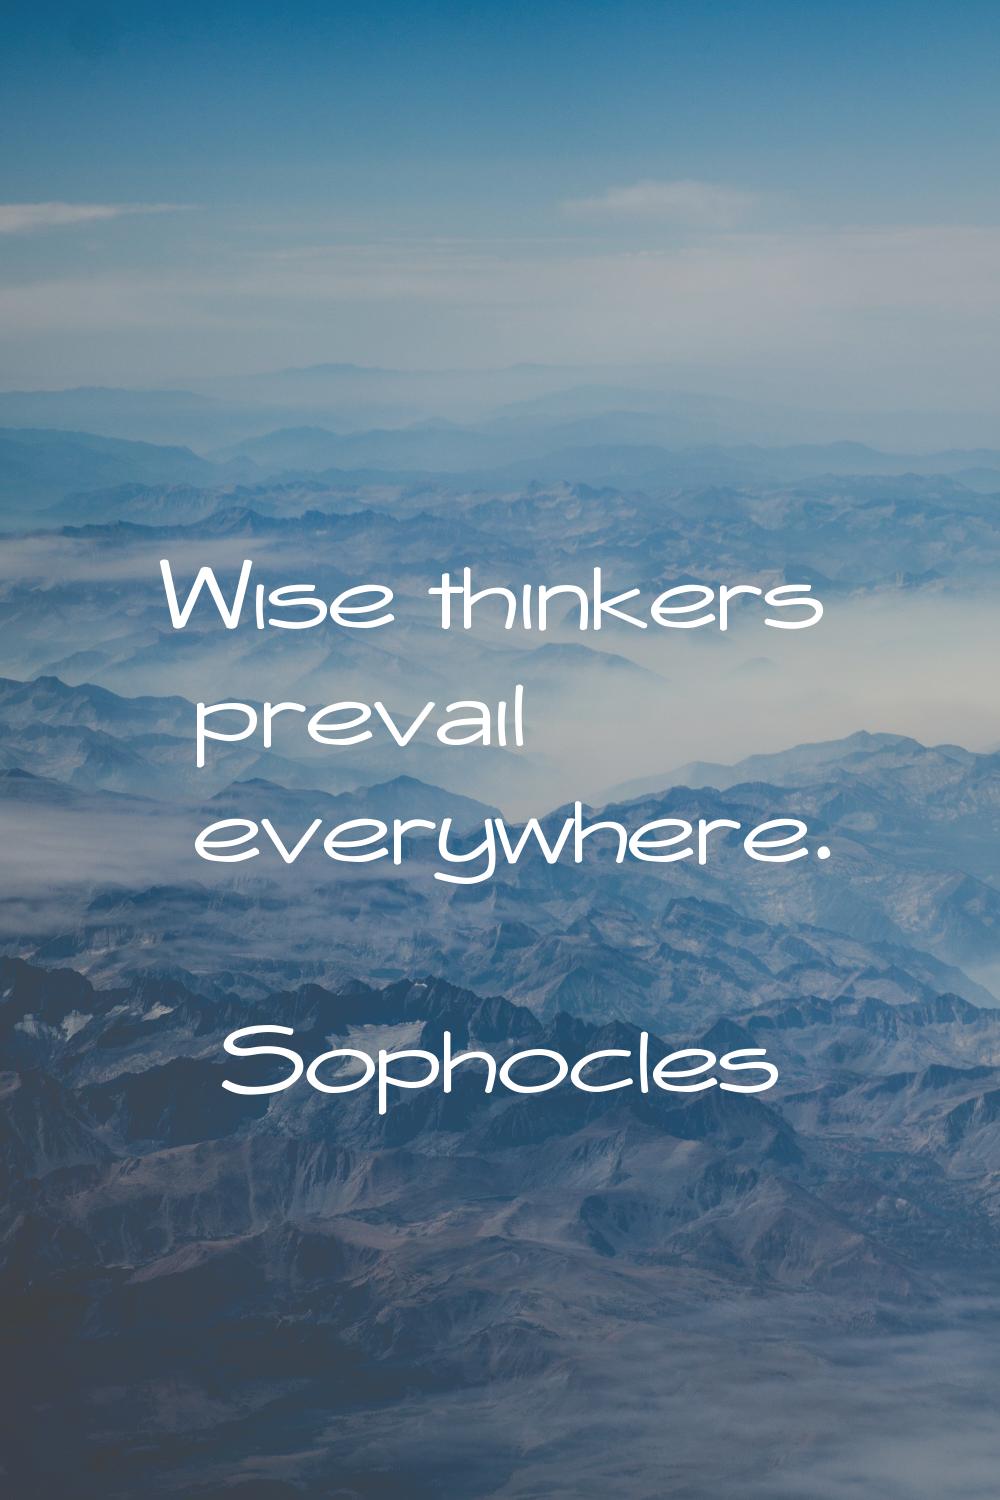 Wise thinkers prevail everywhere.